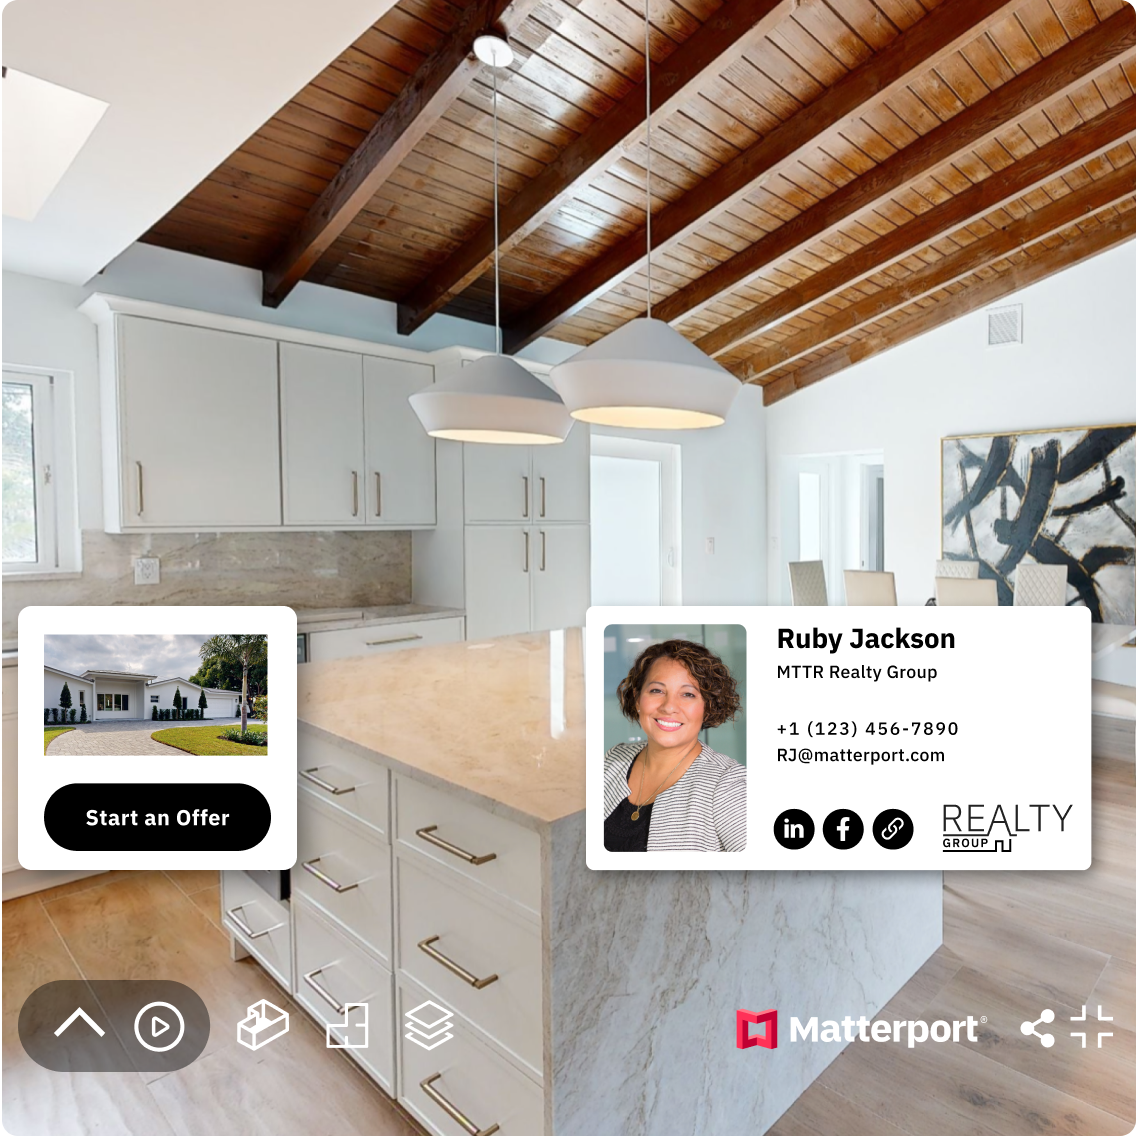 Matterport Model with business card and quick link